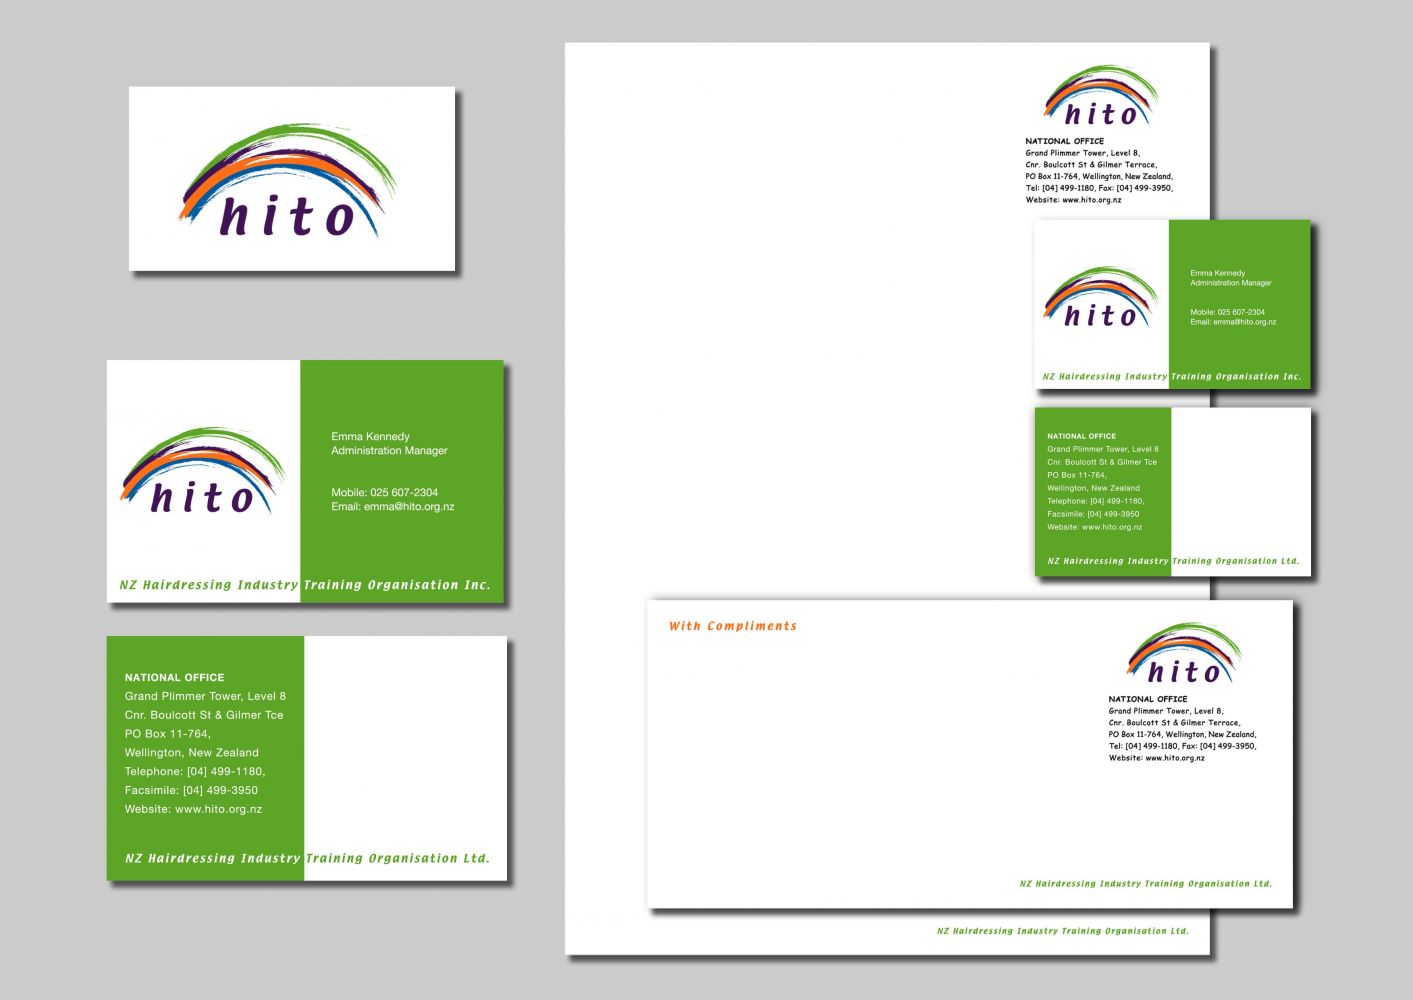 Hair & Beauty Industry Training organisation Business Stationery